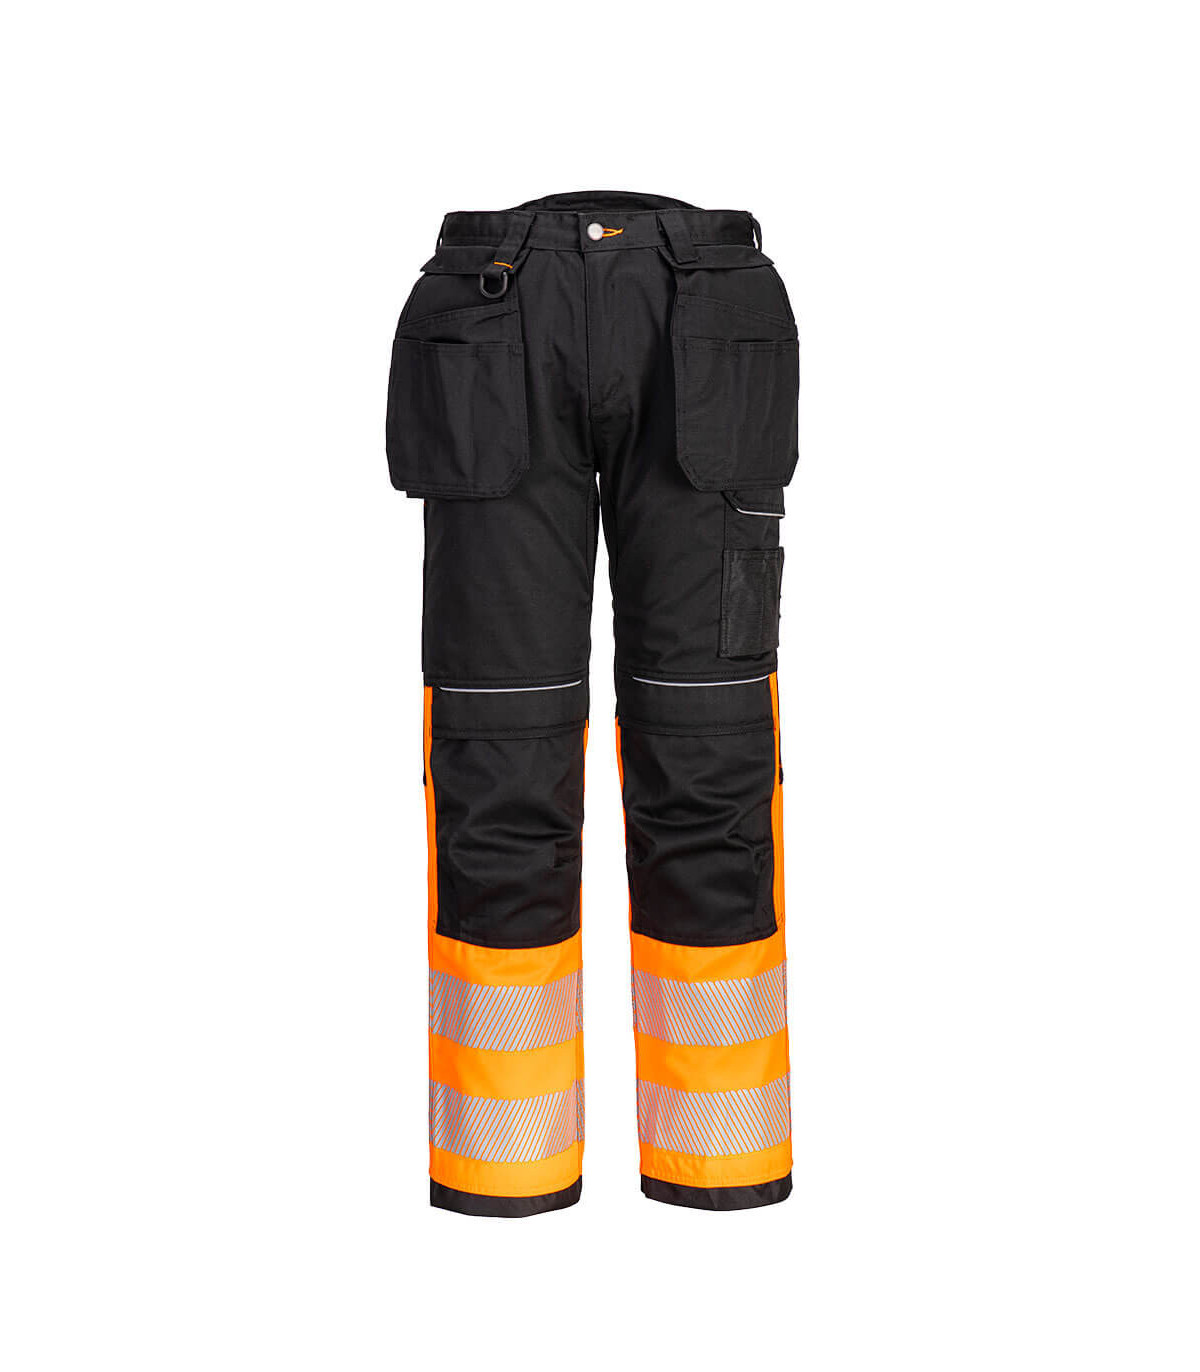 PW3 Reflective Work Pants - High visibility pants - Free pair of